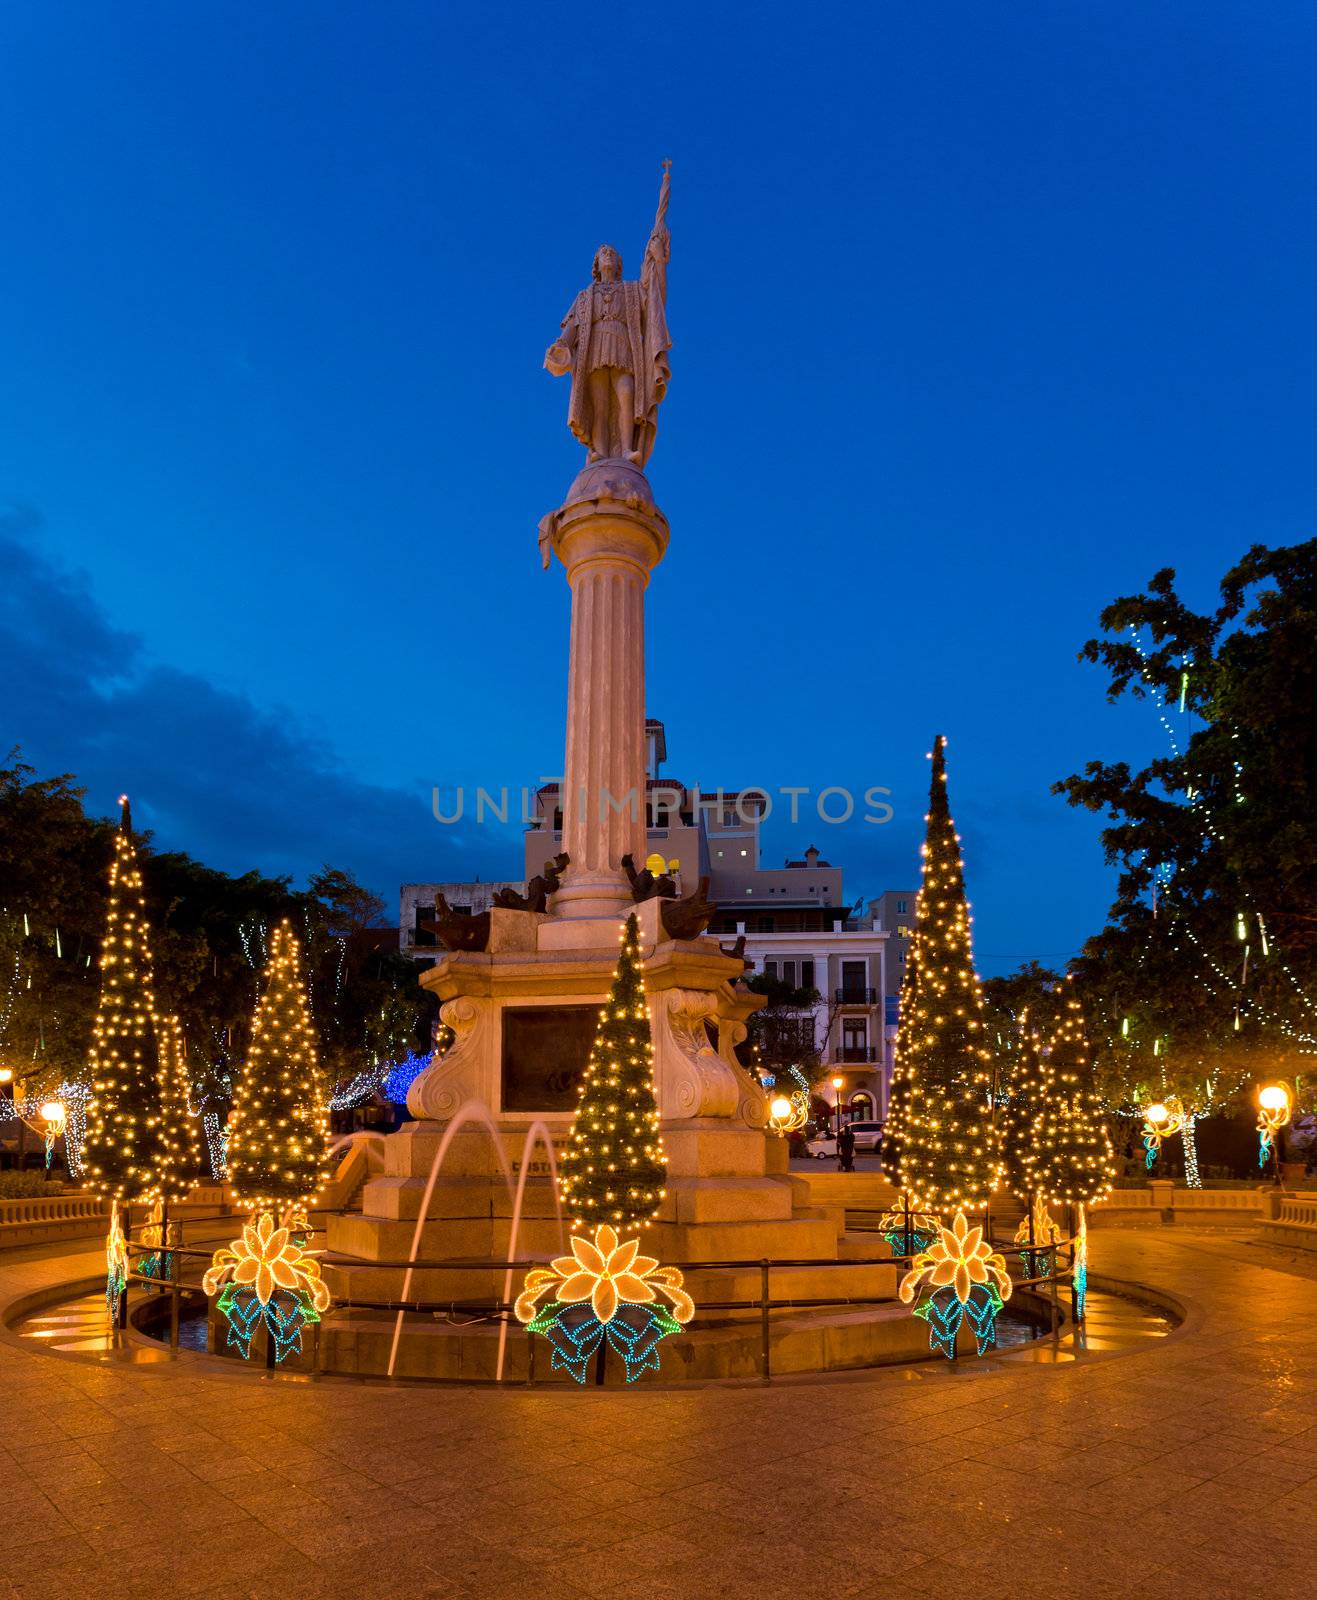 Plaza Colon in old San Juan with statue of Cristobol Colon surrounded by xmas trees and illuminations